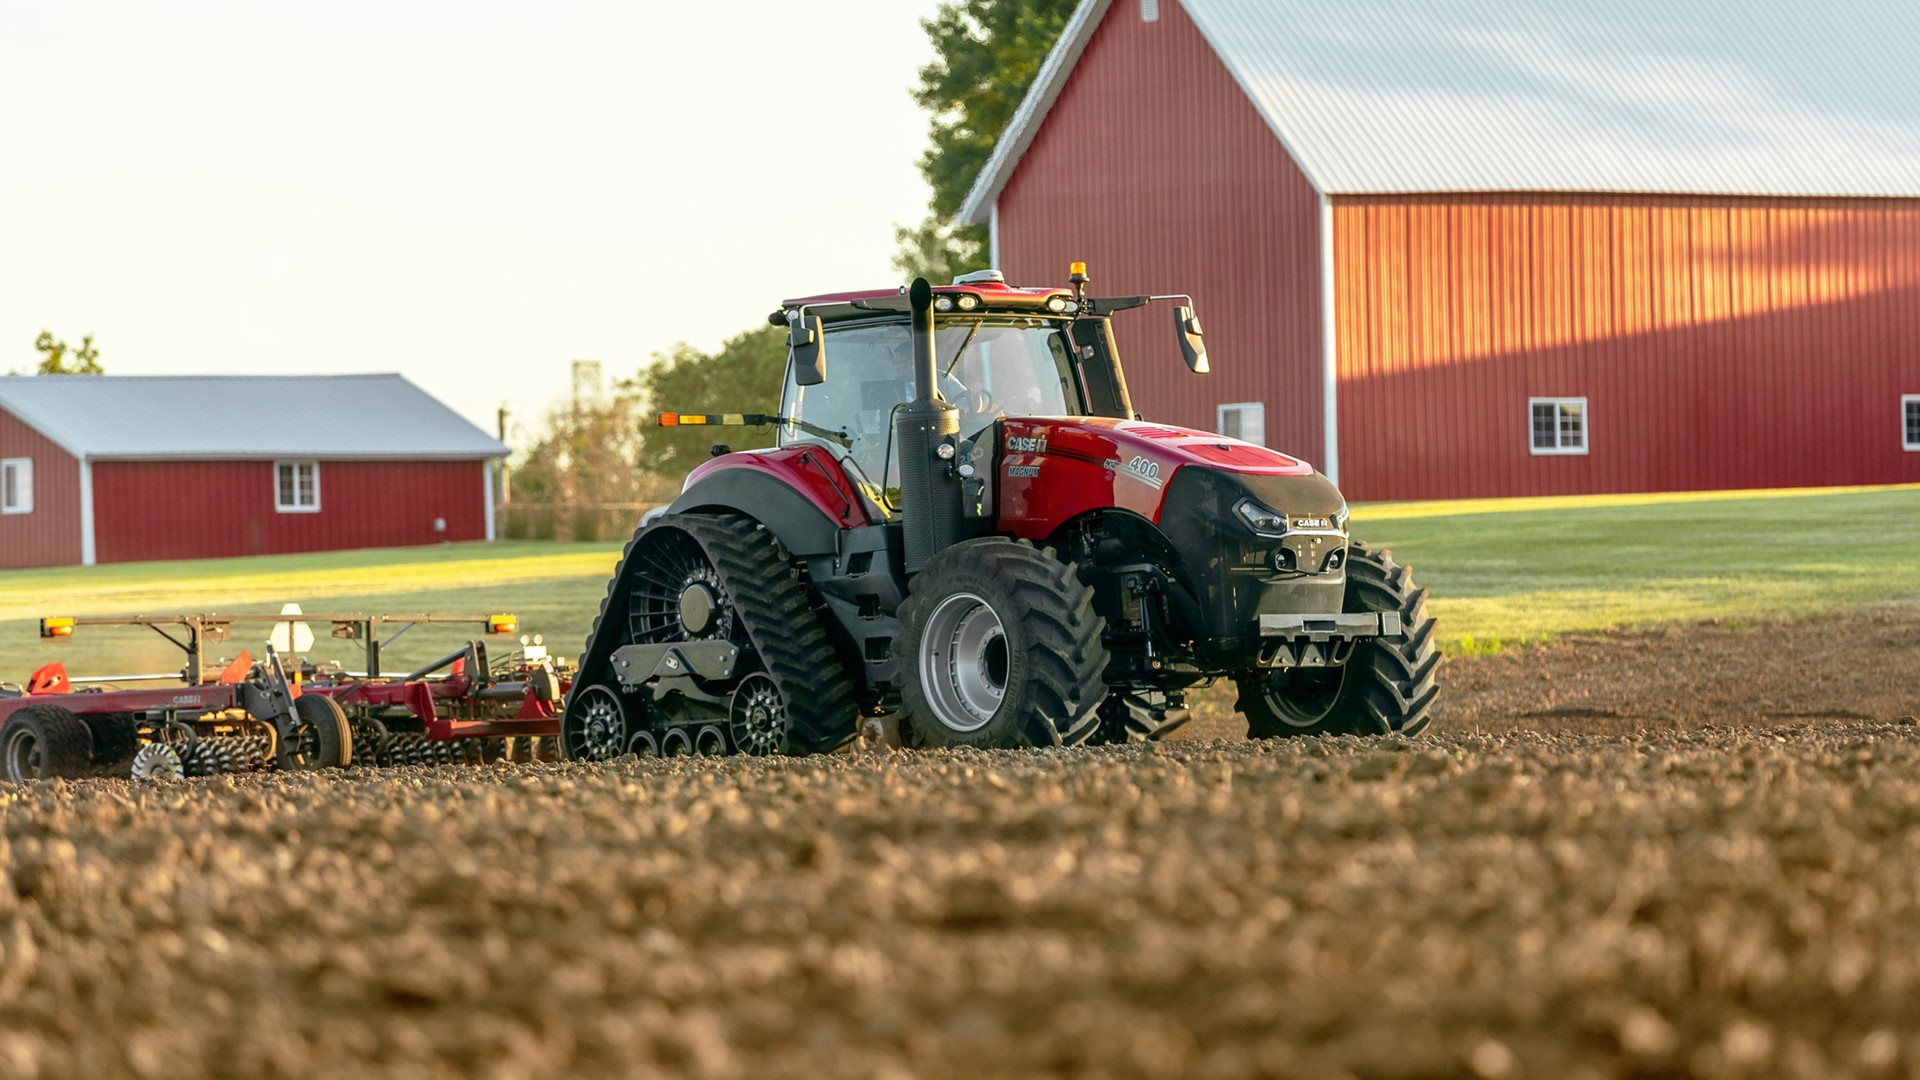 The award-winning AFS Connect Magnum series tractor